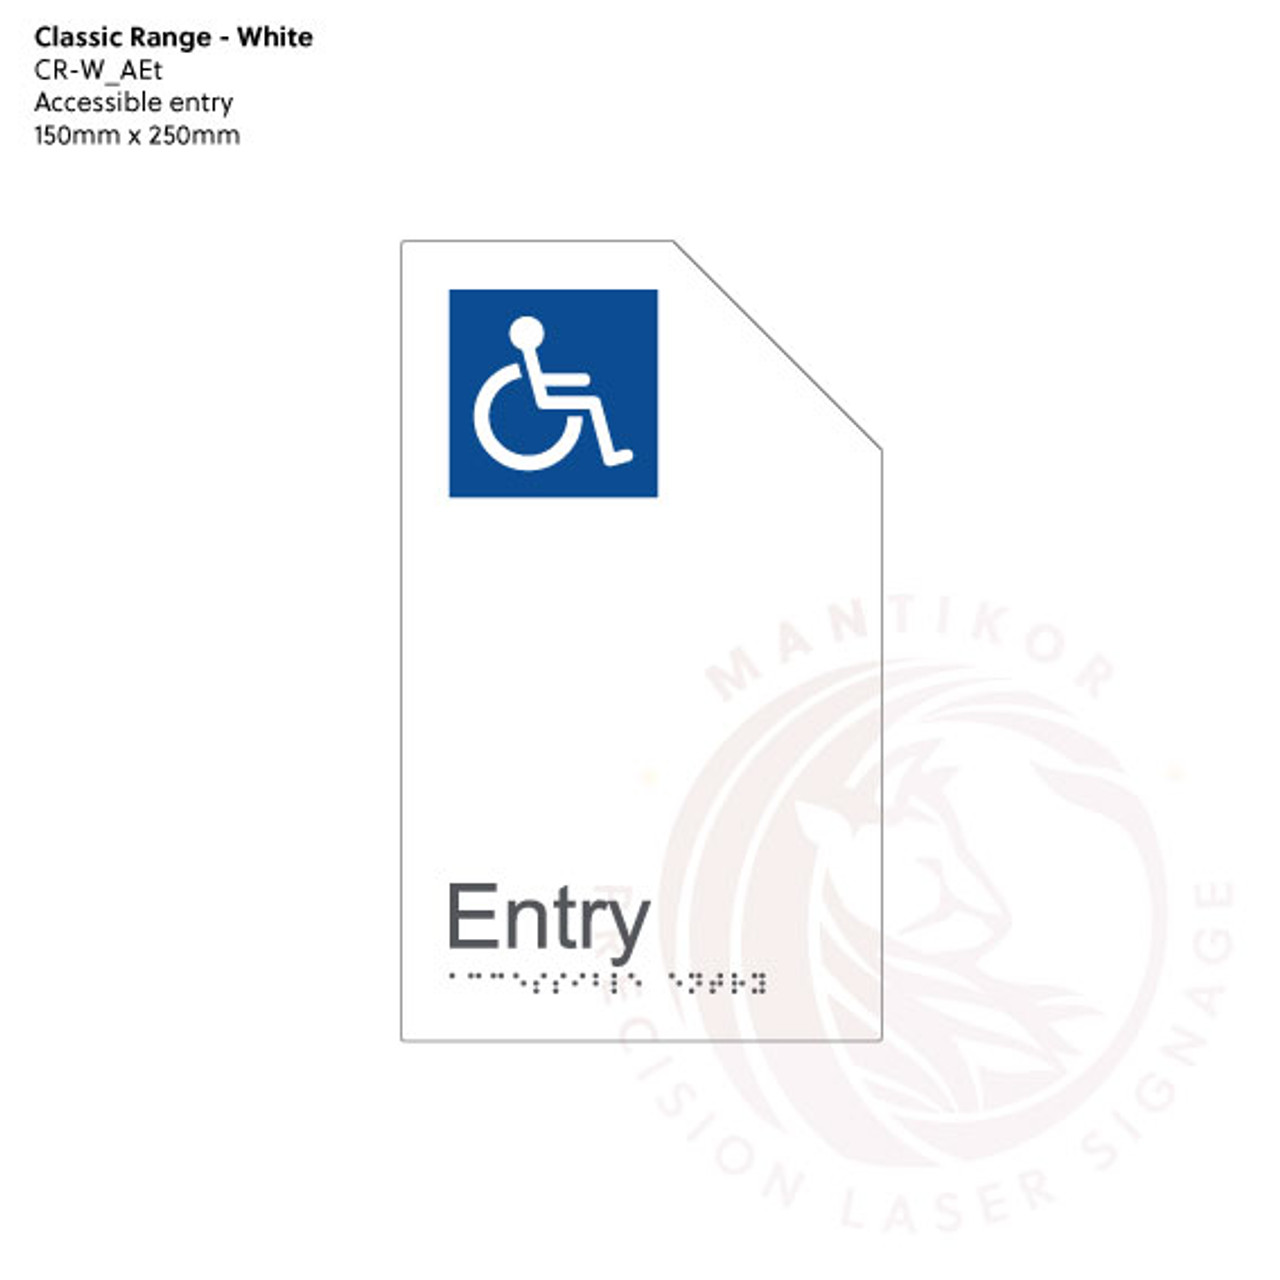 Classic Range - Matte White Acrylic Braille Signs - Accessible Entry